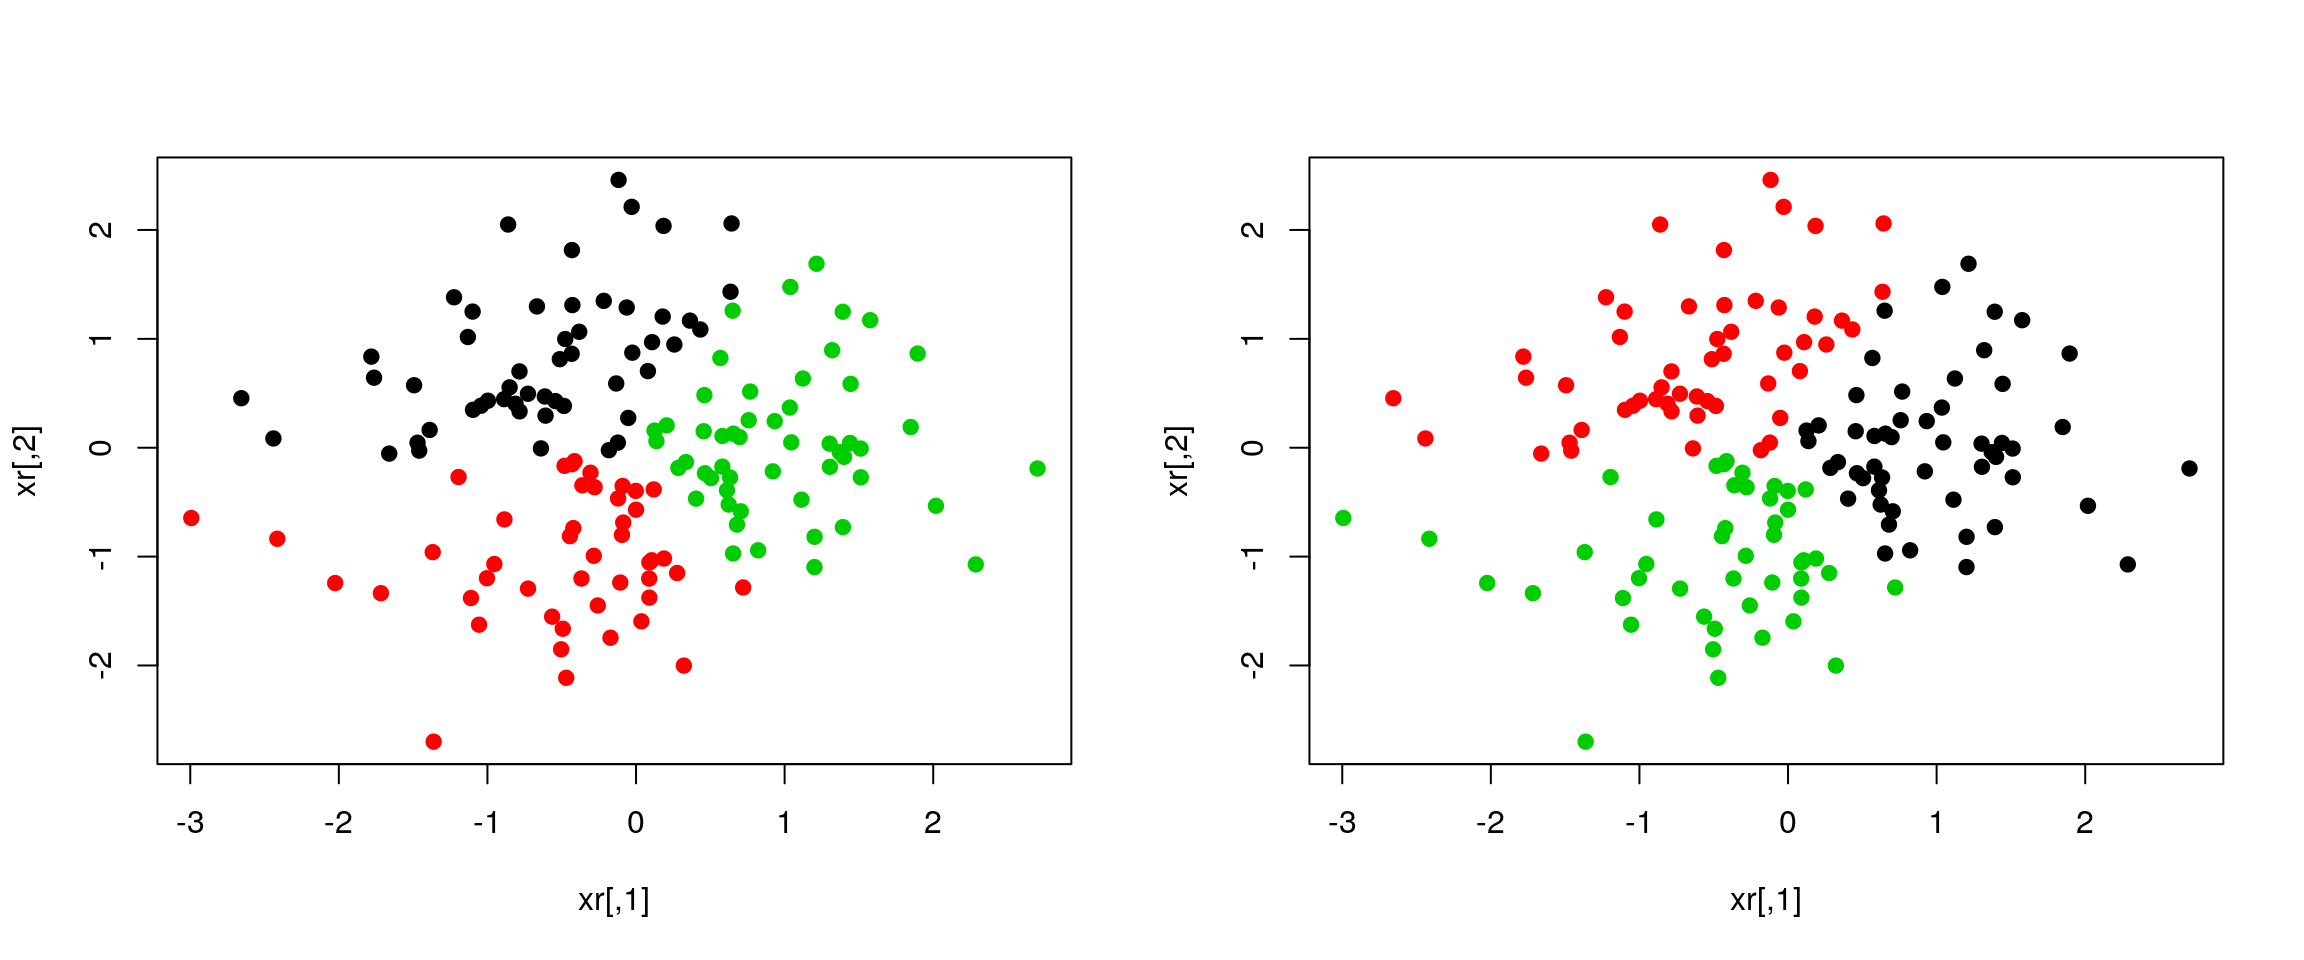 Different k-means results on the same (random) data